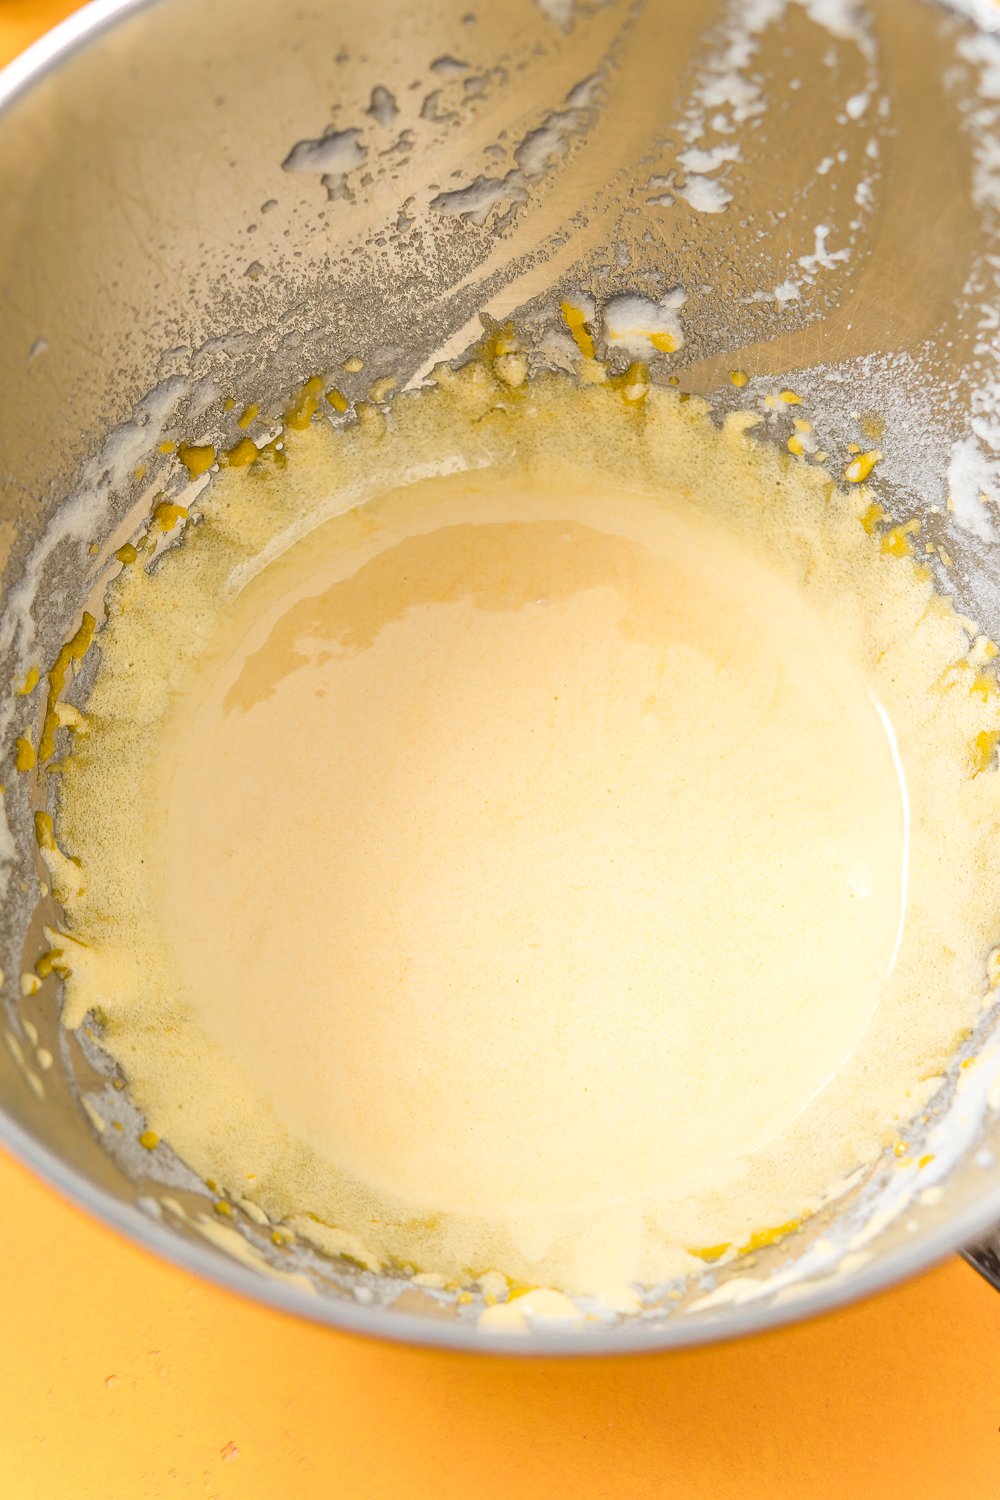 Egg yolks and sugar beaten together in a metal mixing bowl.